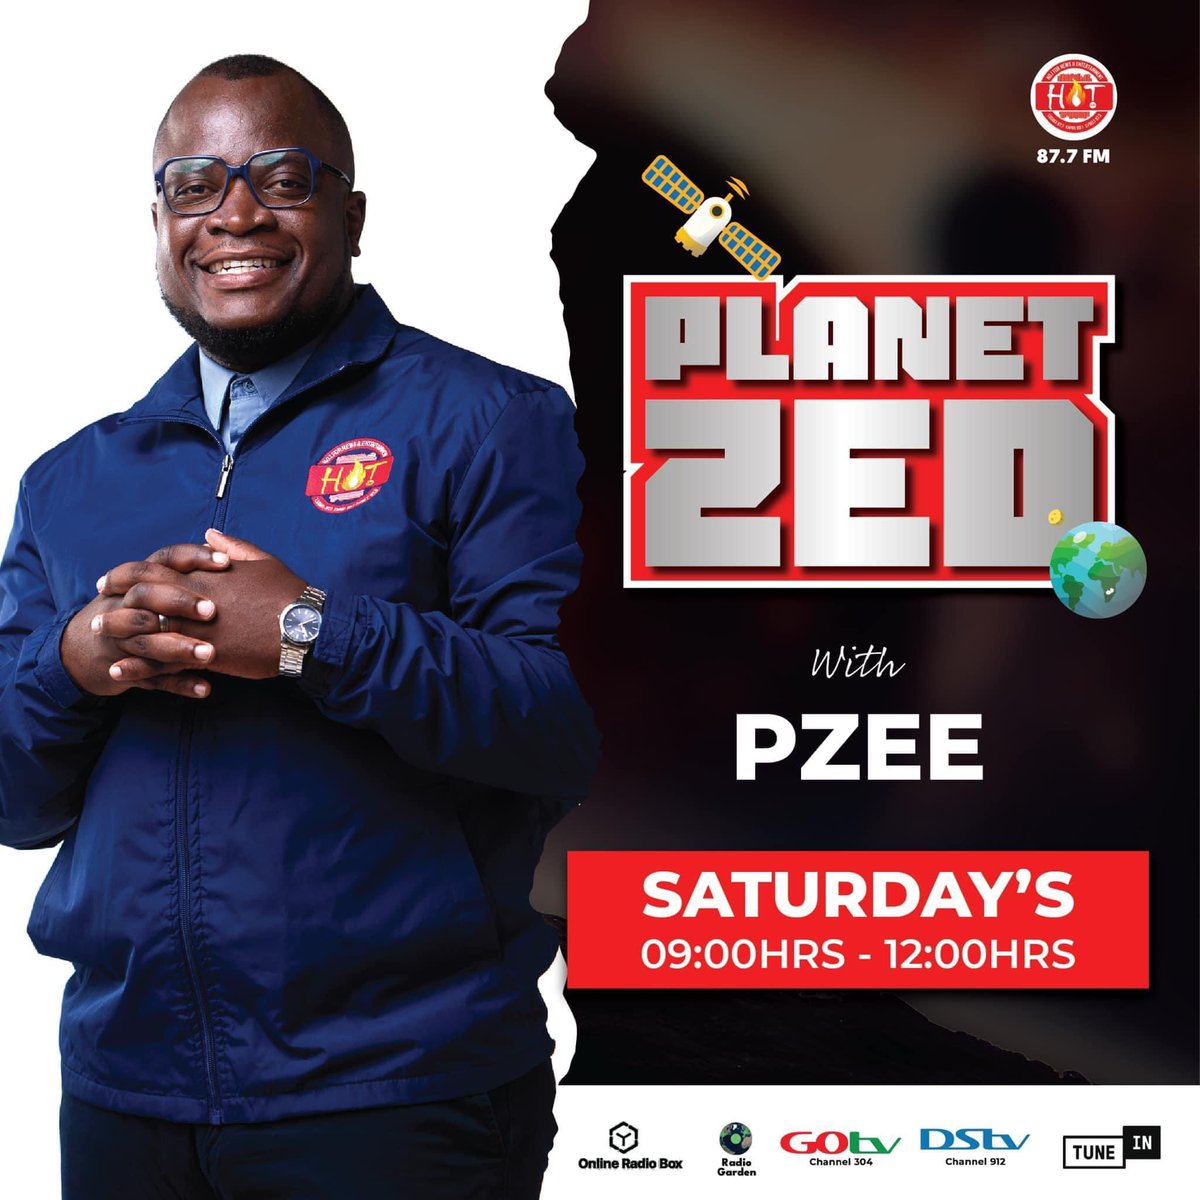 PLANET ZED PZEE aka Mr. Hotline Bling takes you until 12Hrs on #PlanetZed with the best of Zambian hits. #NumberOneForNewsandEntertainment #PlanetZed #Hotat19_24